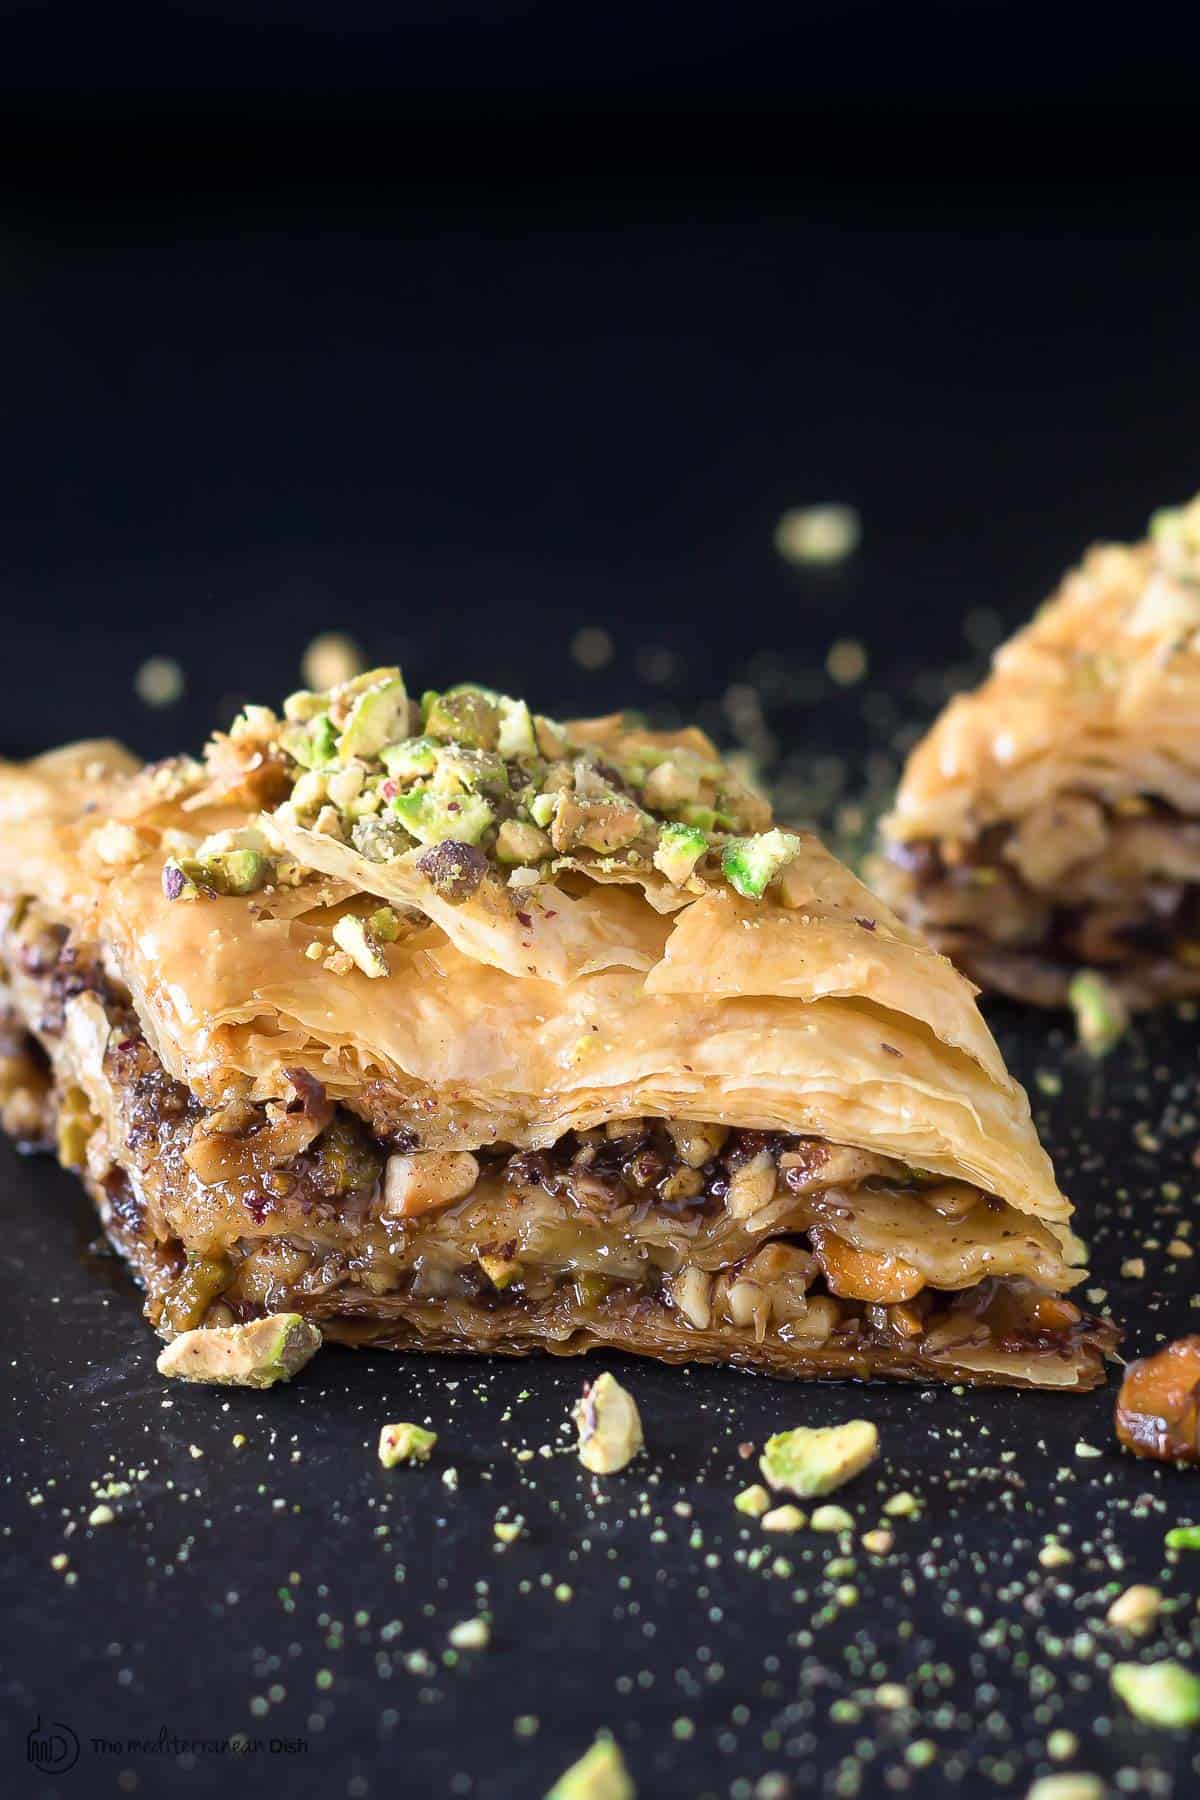 Two pieces of Greek baklava with pistachio pieces sprinkled on top